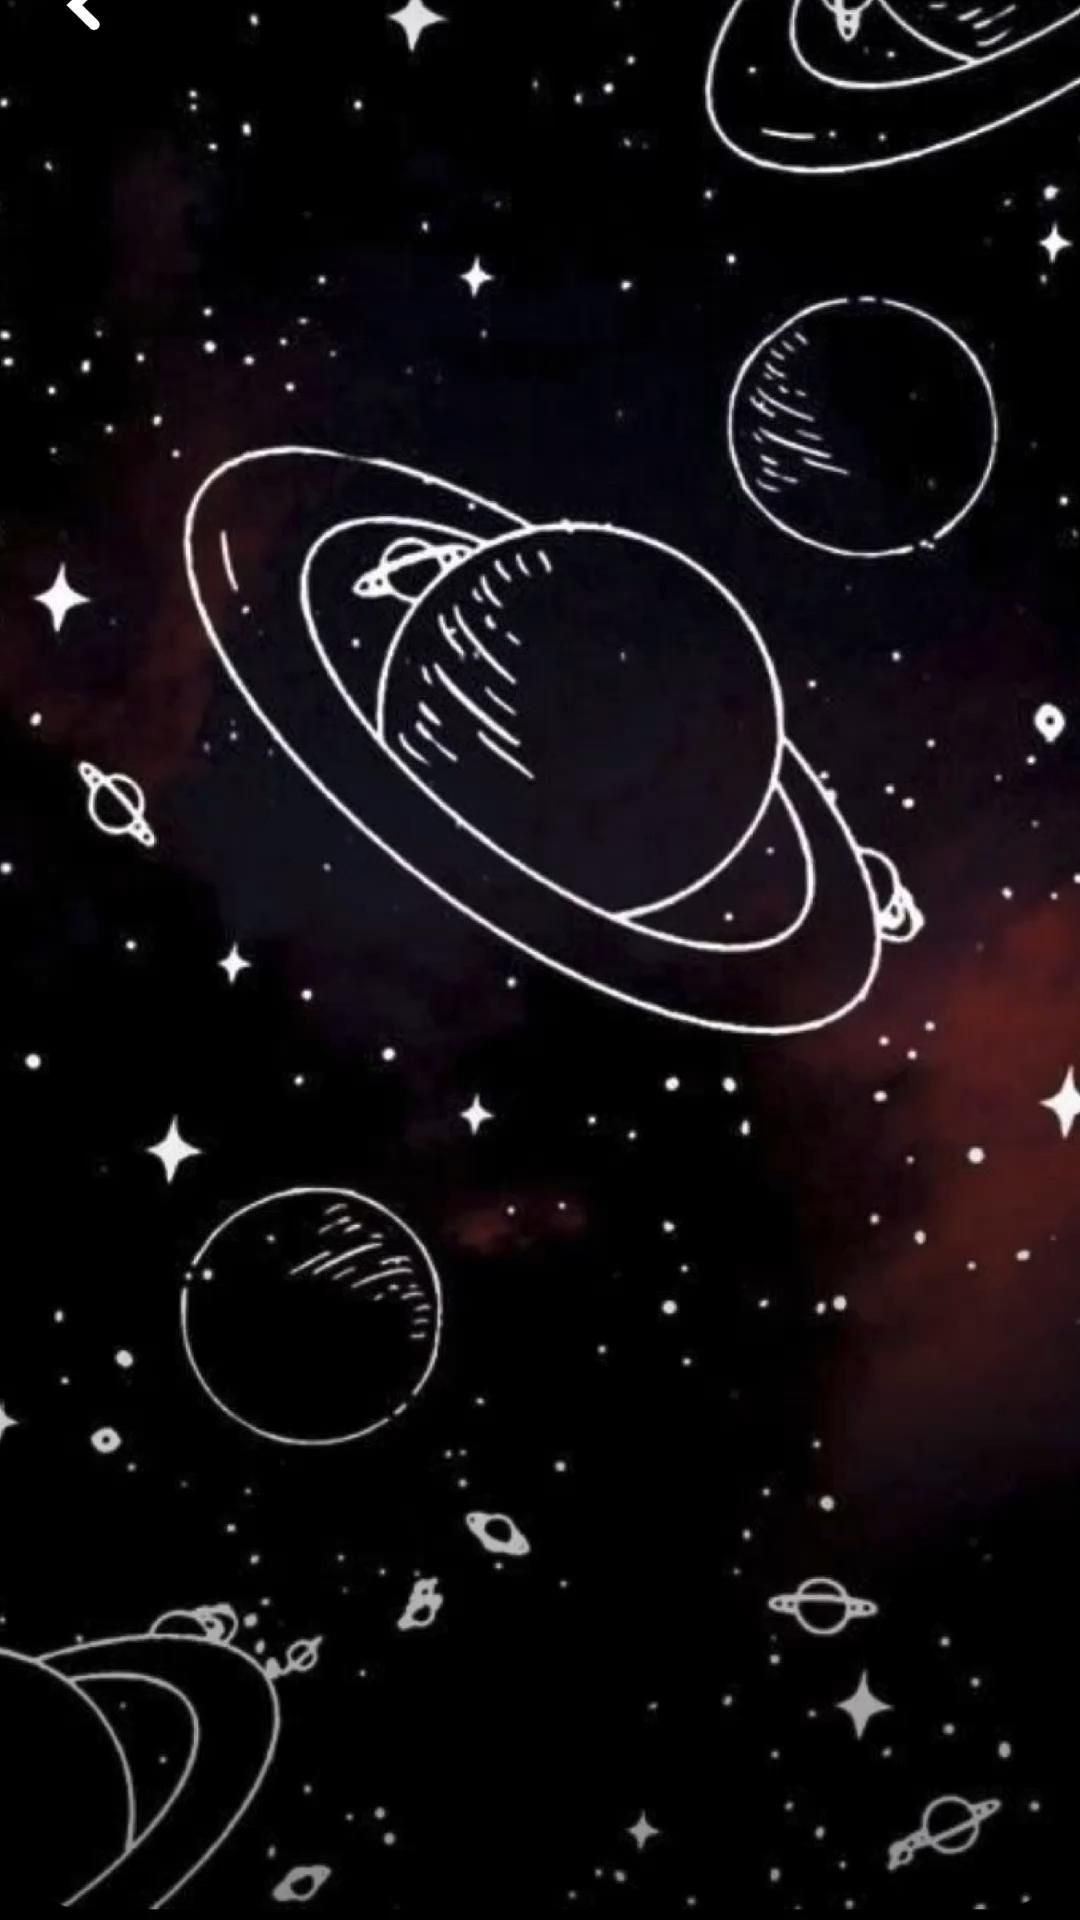 A drawing of planets in space with stars - Space